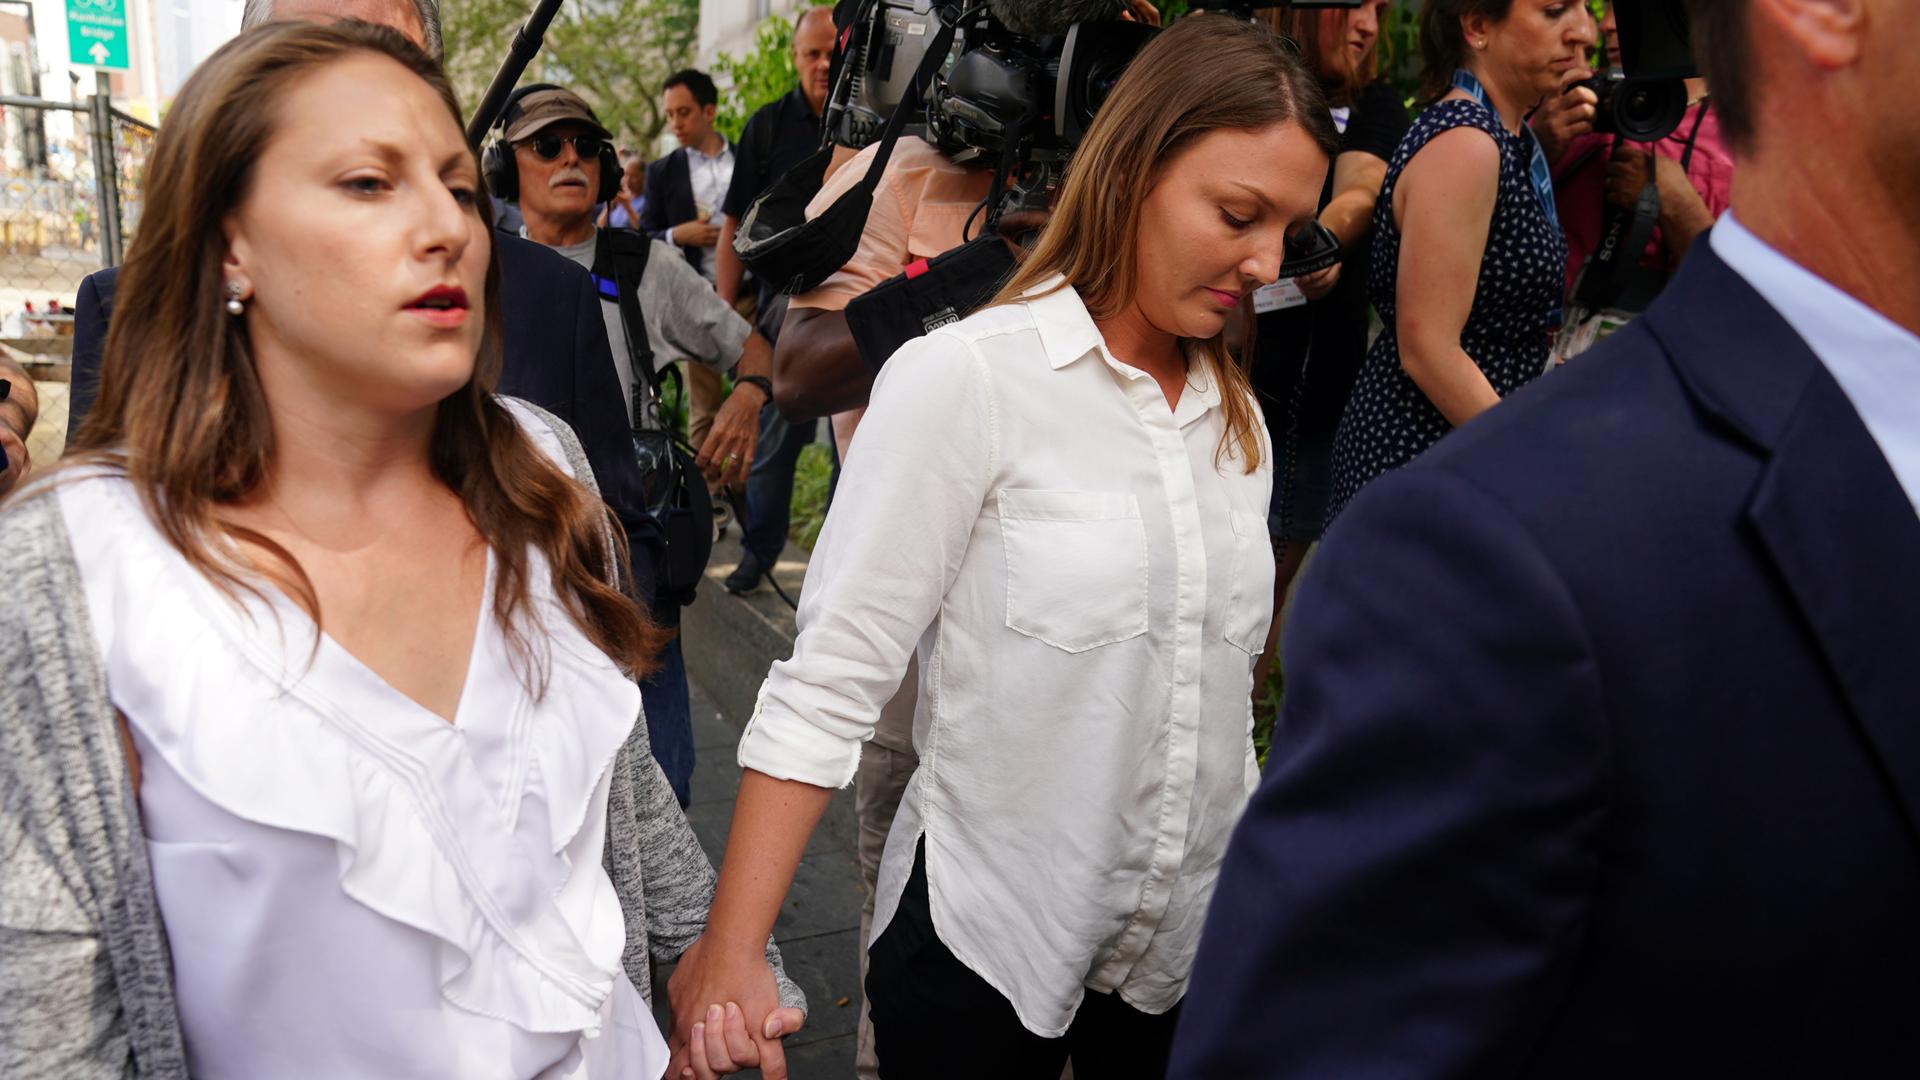 Two women walk with their hands clasped together as they're surrounded by a crowd of reporters